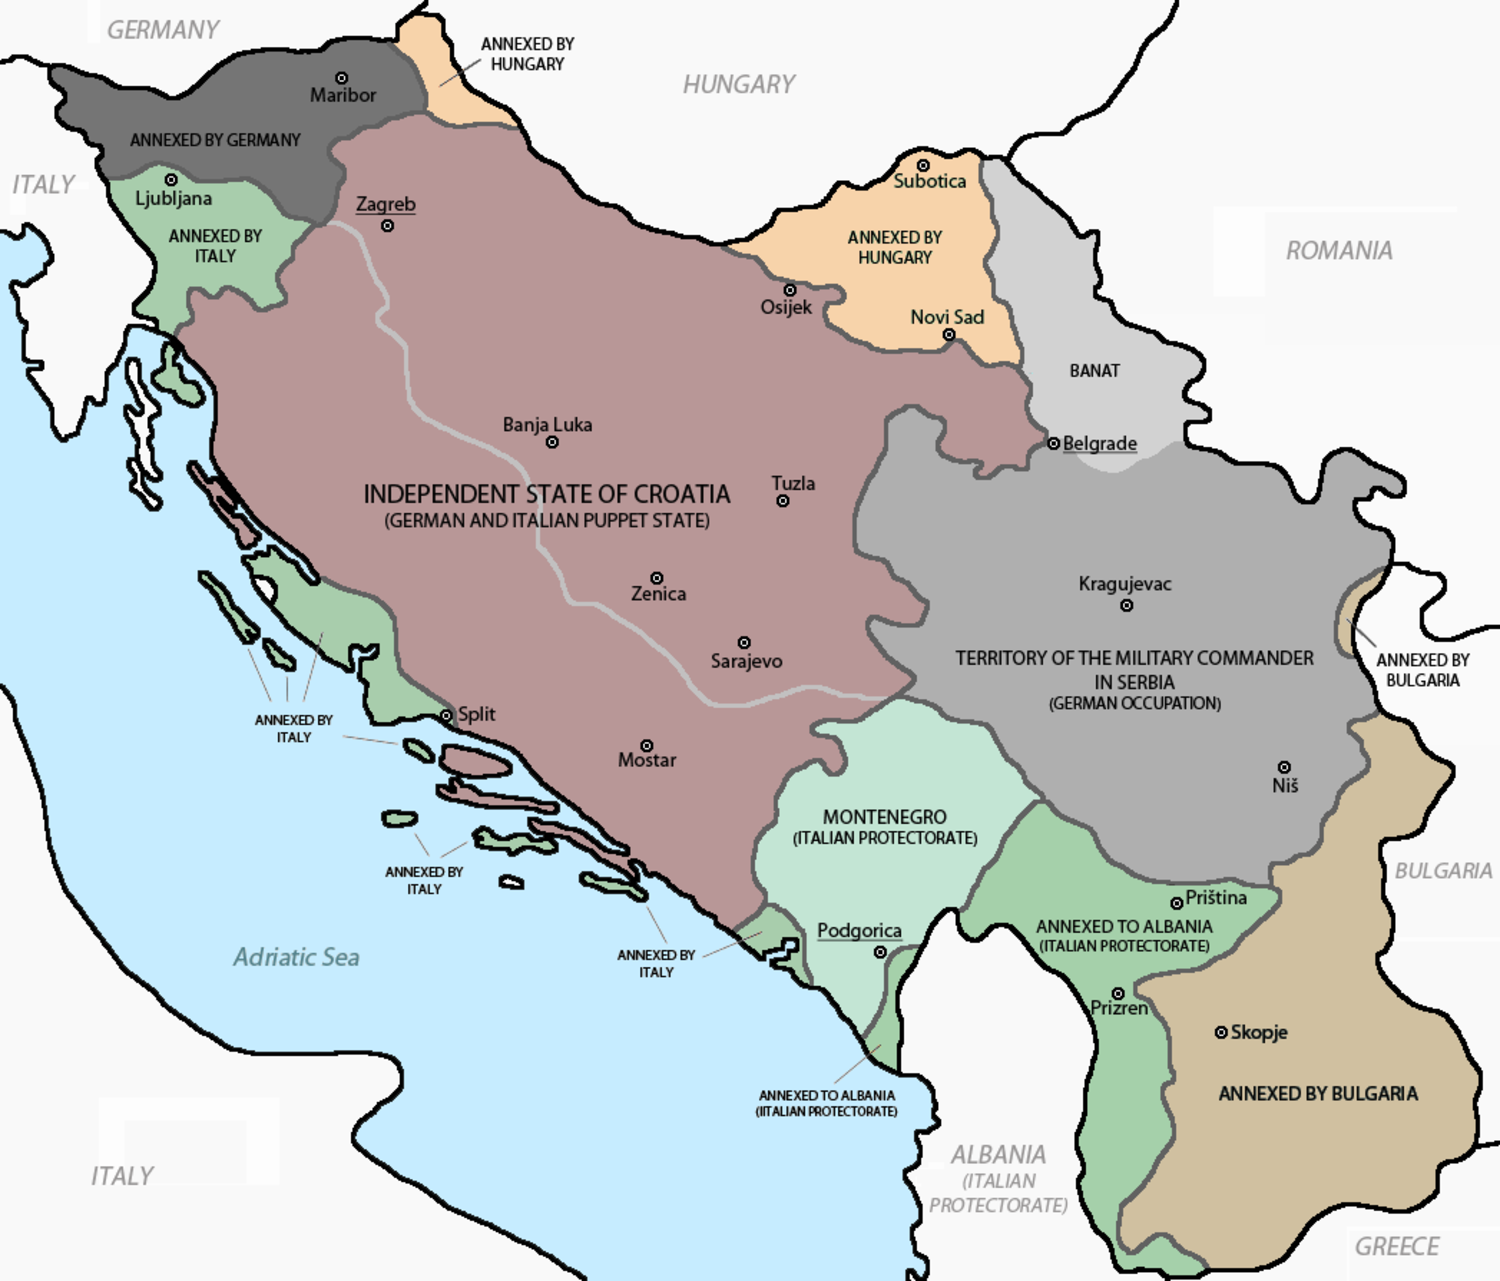 Axis occupation of Vojvodina - Wikipedia